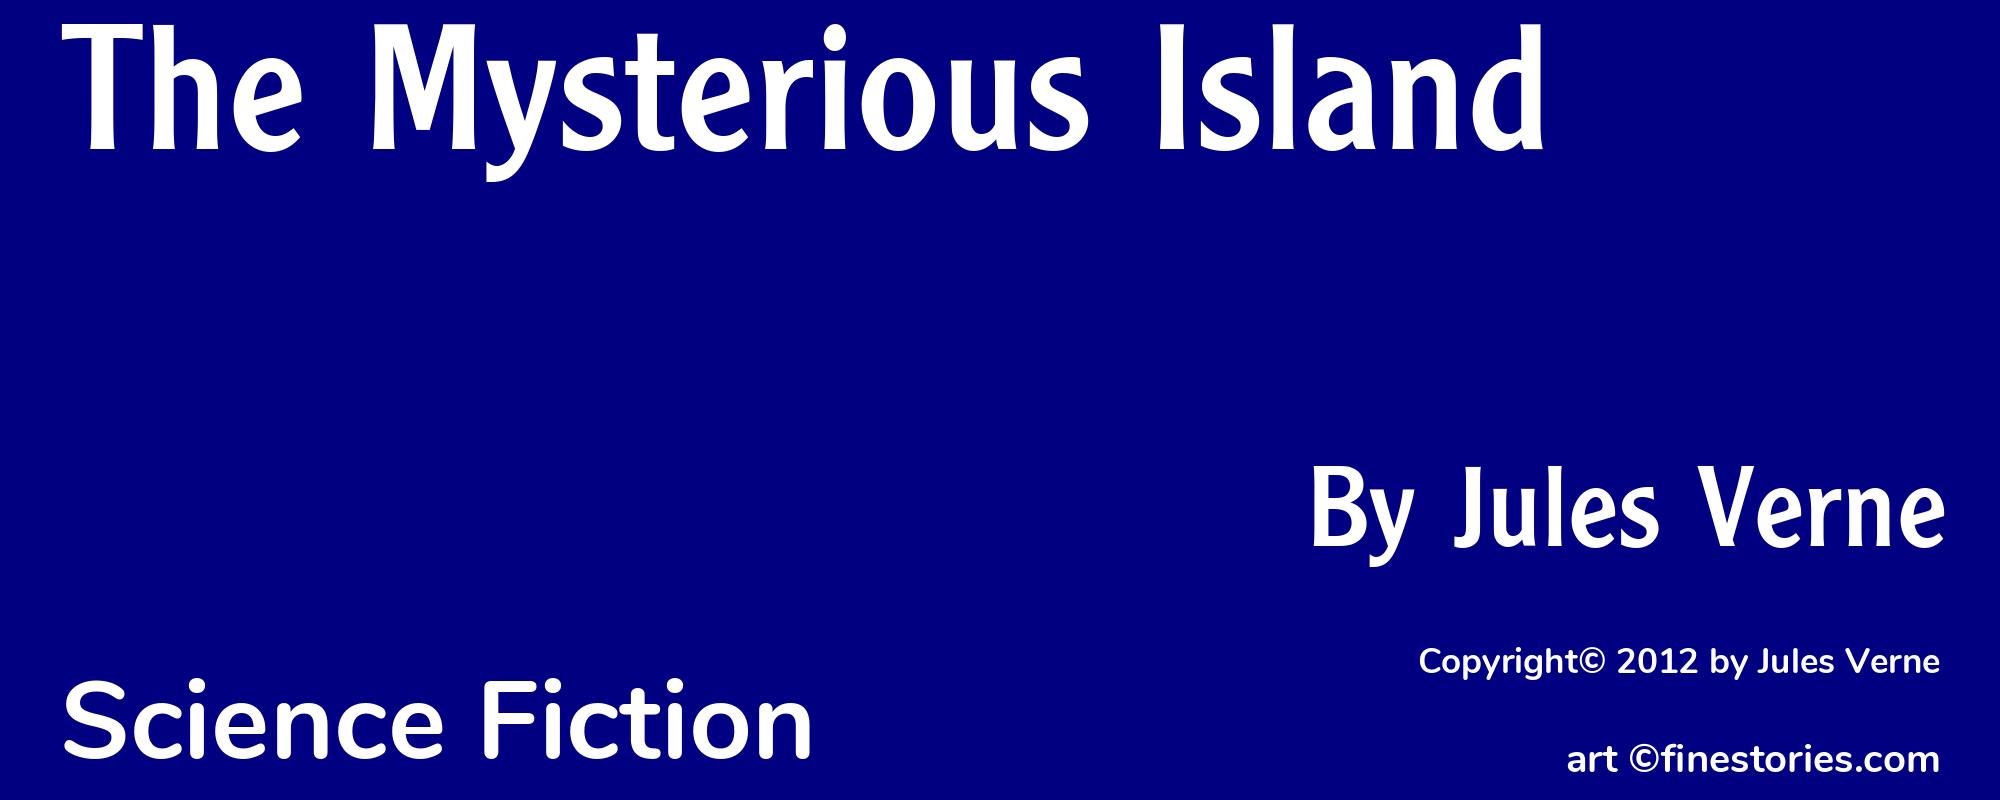 The Mysterious Island - Cover